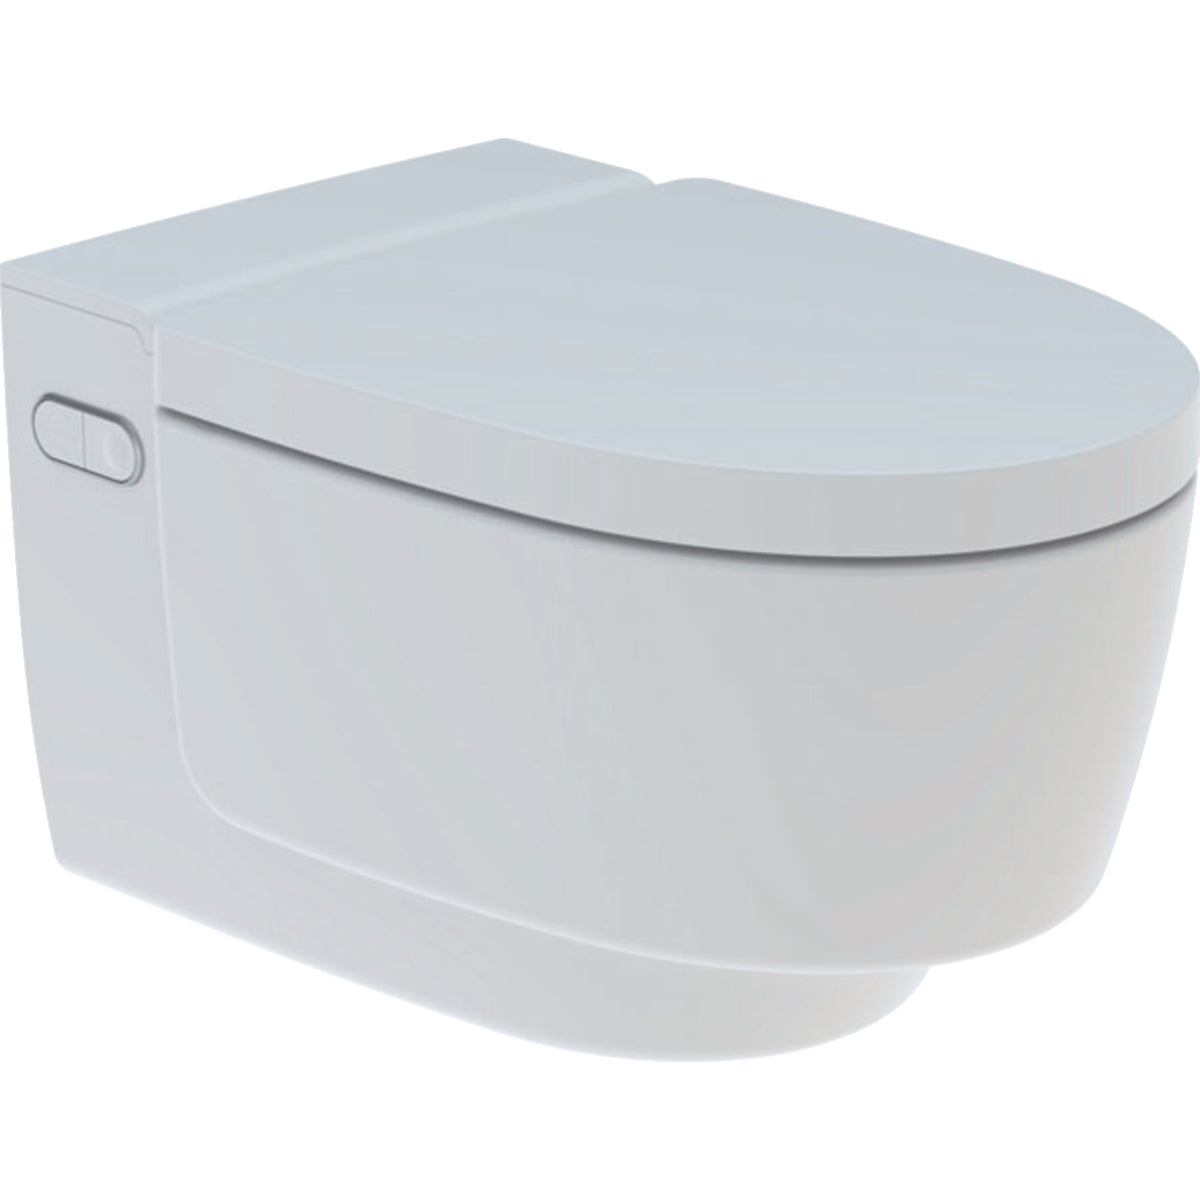 Geberit AquaClean Mera Classic Rimless Wall Hung WC With Soft Close Toilet Seat